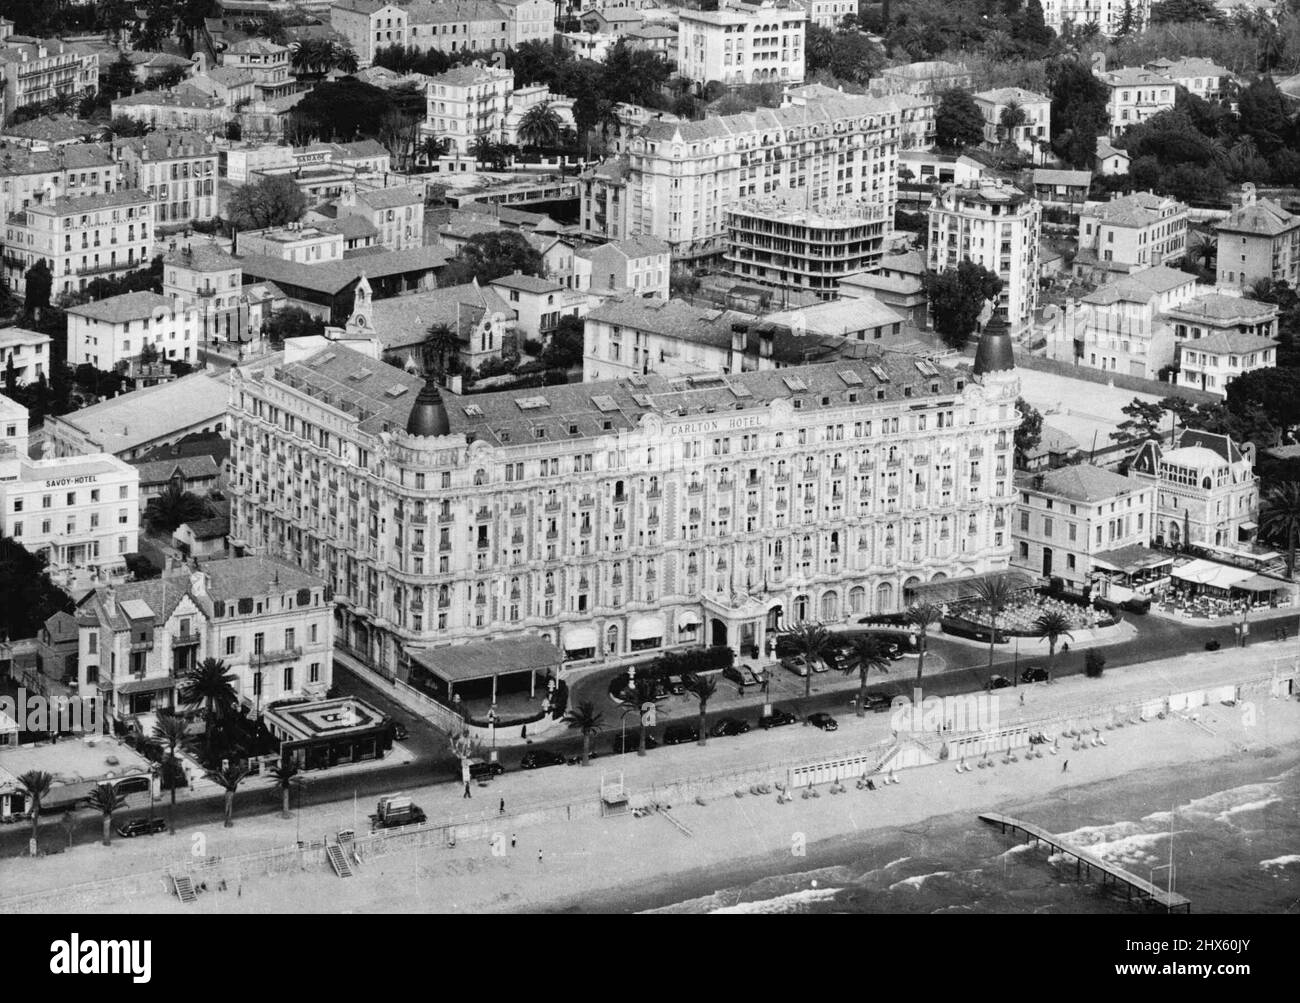 Prince Takes Over Hotel For Rita's Wedding : A new aerial view, taken this week, of Cannes, showing the Carlton hotel. The huge Carlton hotel, on the front at Cannes has practically been taken over by Prince Aly Khan for the reception after his wedding to Rita Hayworth at Vallauris, hillside village nearby, tomorrow (Friday). French city of Cannes, where MacKenzie operated successfully. May 26, 1949. (Photo by Fox).;Prince Takes Over Hotel For Rita's Wedding : A new aerial view, taken this week Stock Photo